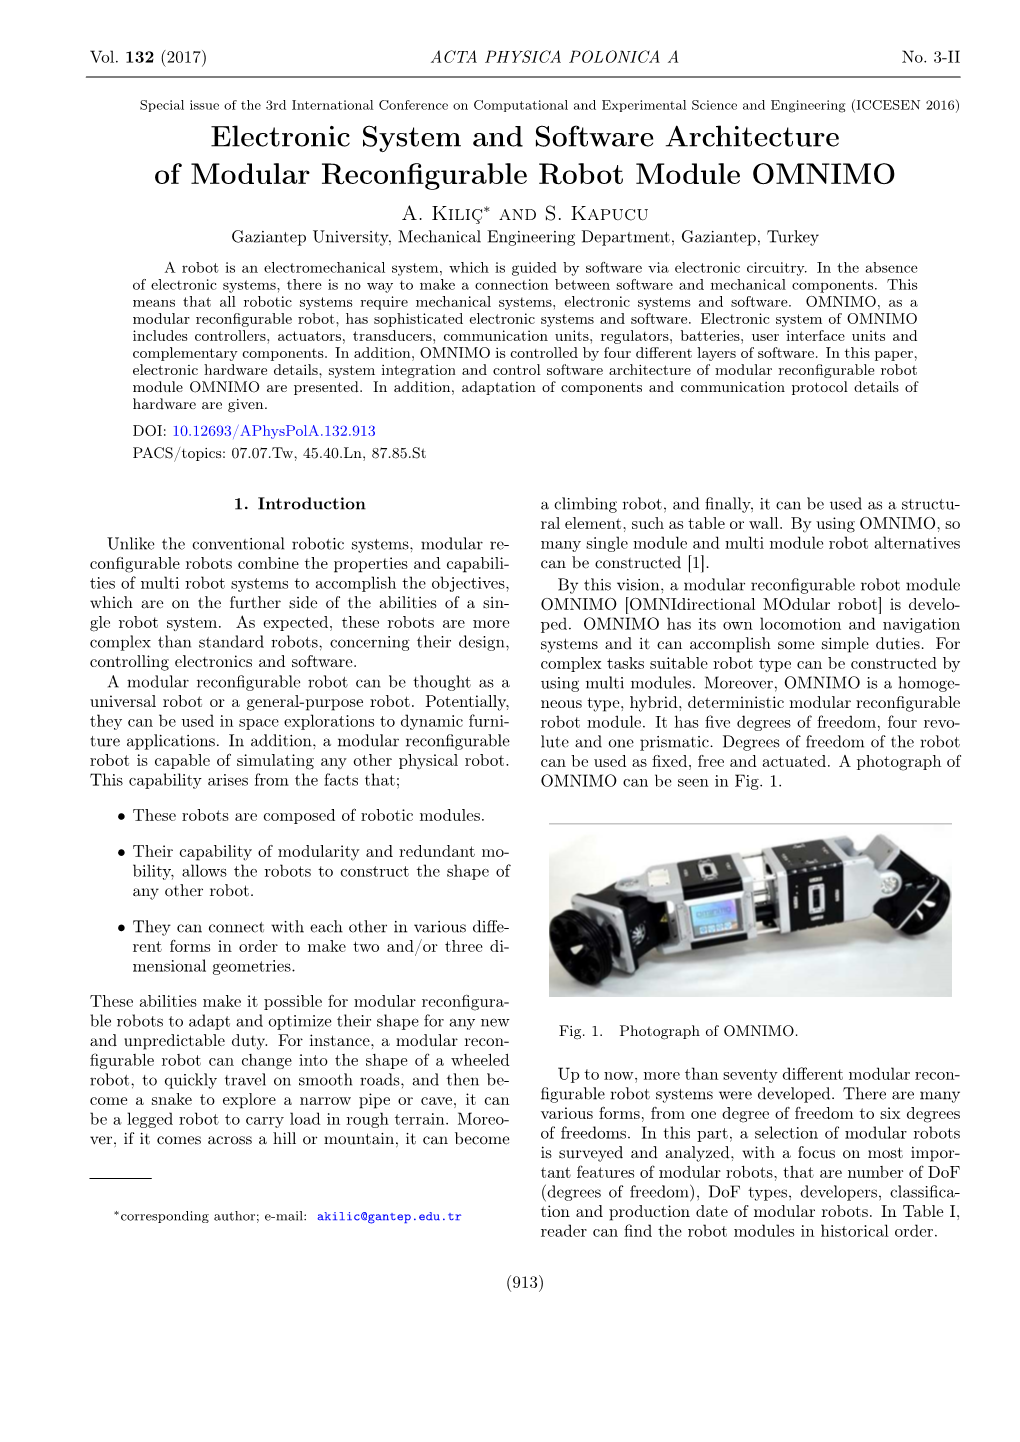 Electronic System and Software Architecture of Modular Reconfigurable Robot Module OMNIMO